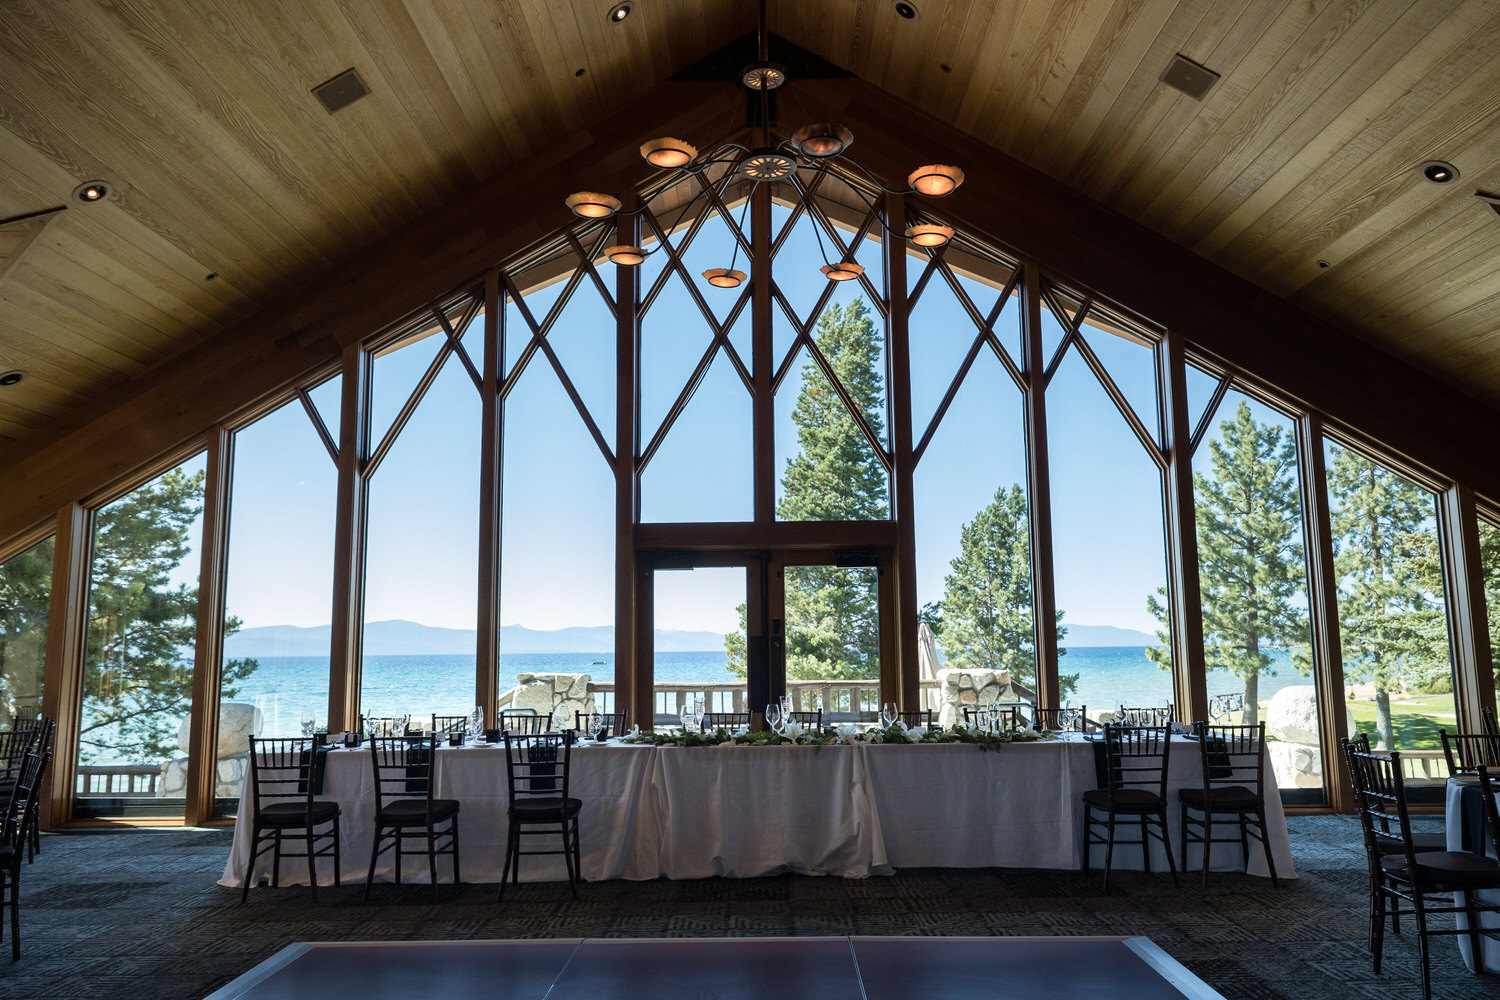 Wide angle view of Lake Tahoe through the floor-to-ceiling windows in the North Room at Edgewood Resort.